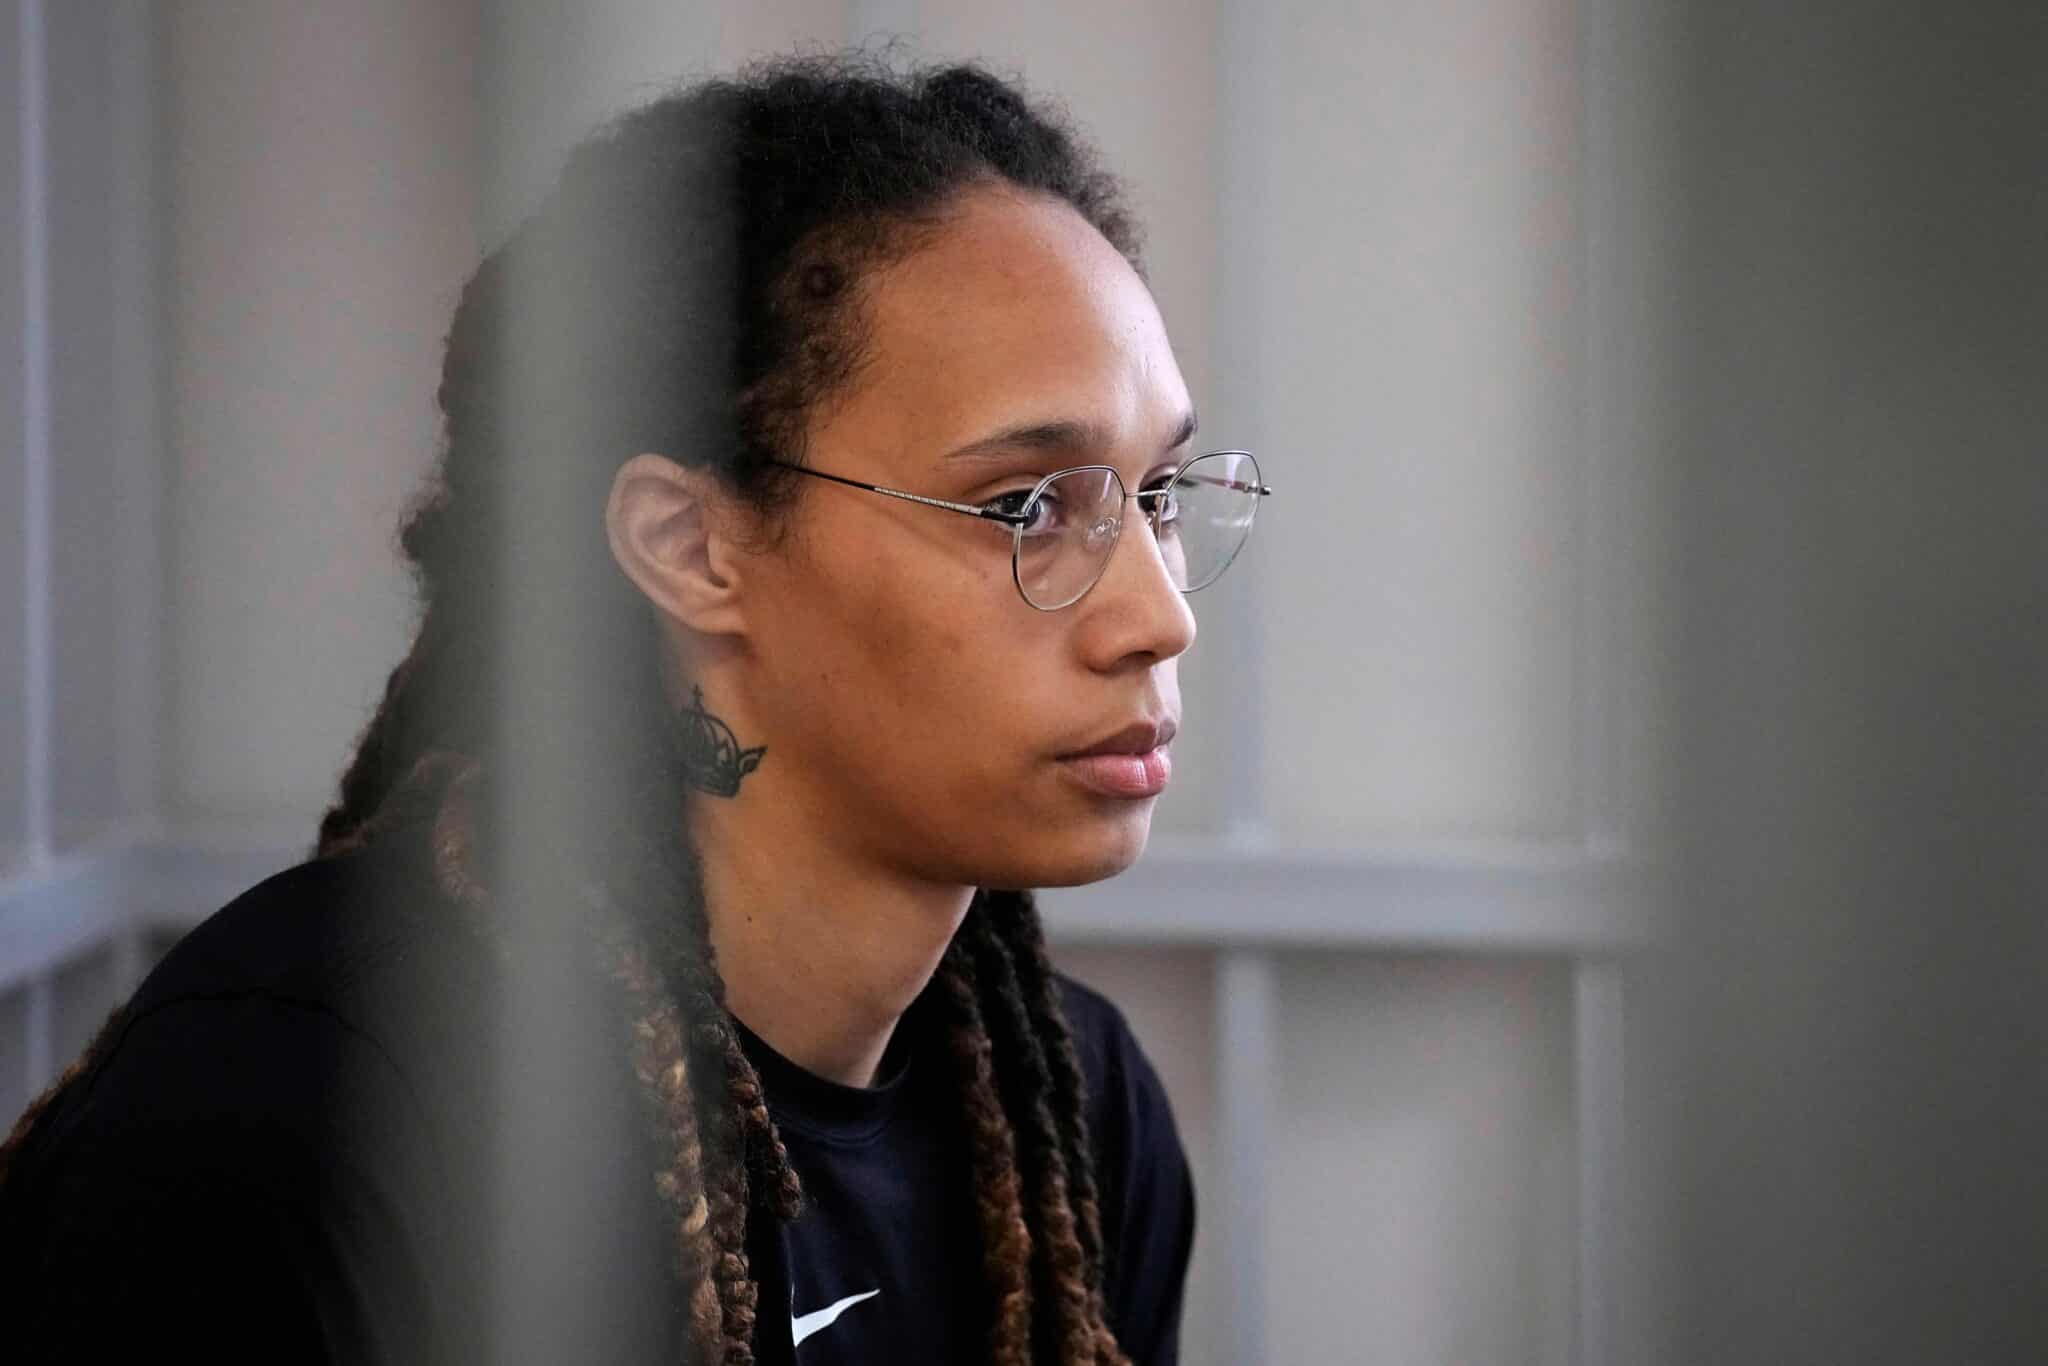 Brittney Griner sits in a prison cell